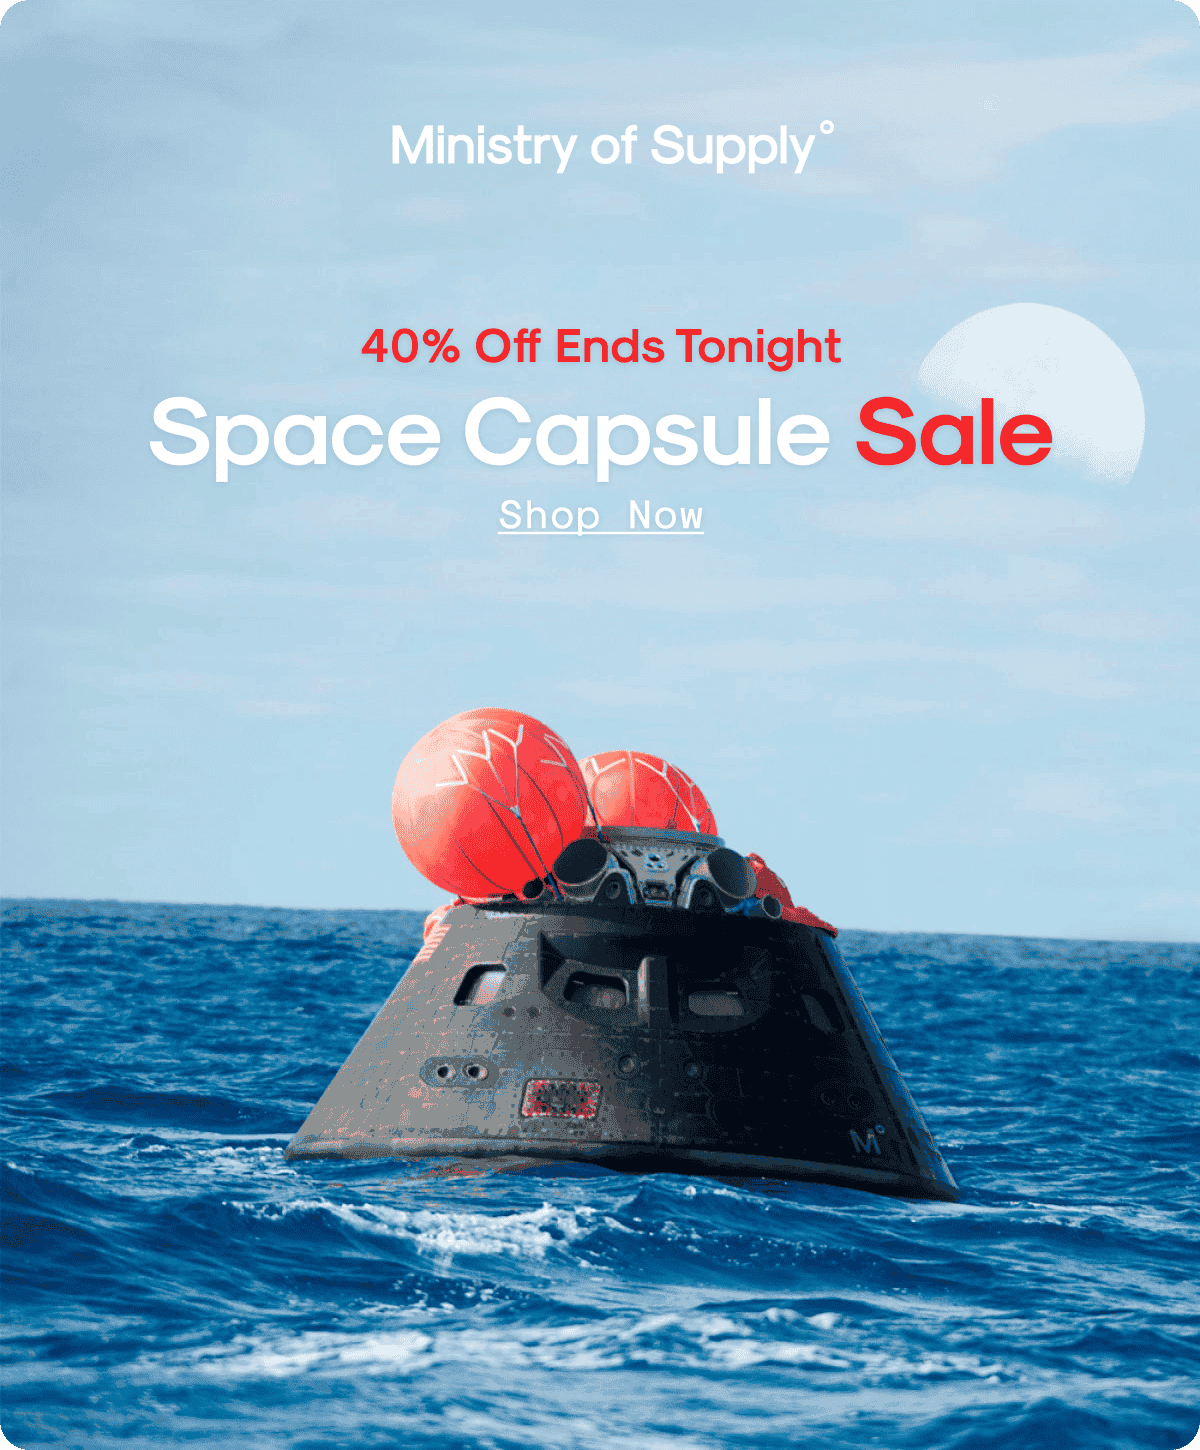 40% Off Ends Tonight: Space Capsule Sale